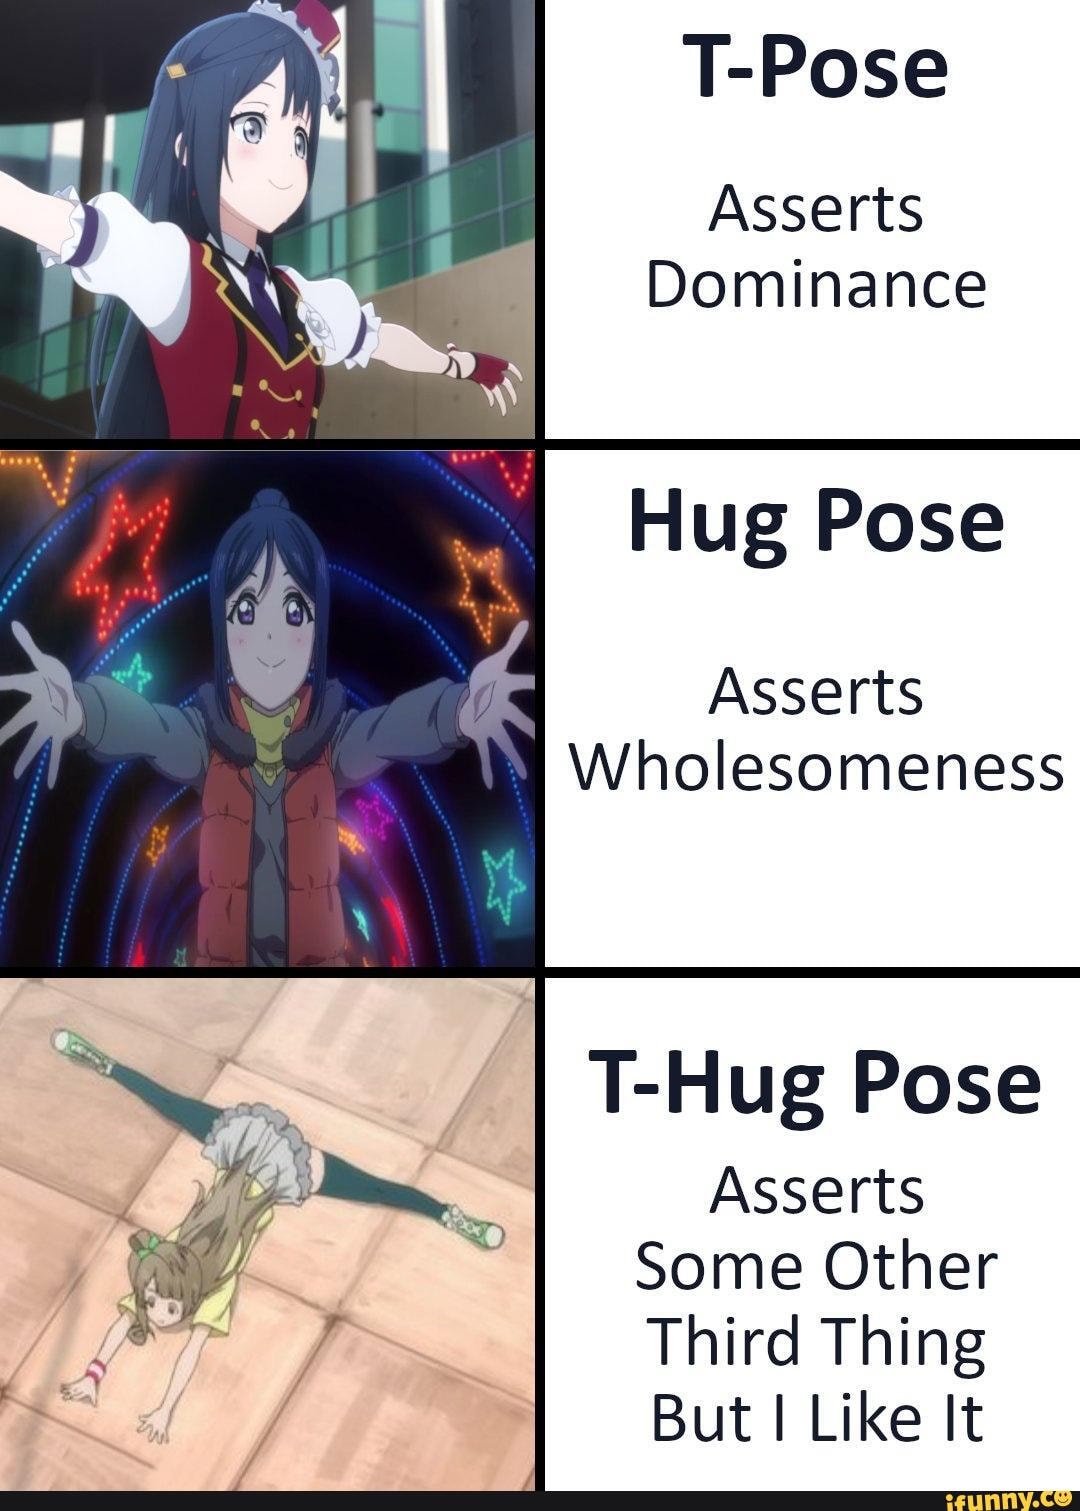 How to Assert Dominance By T-Posing and Screaming, by Big Chungus